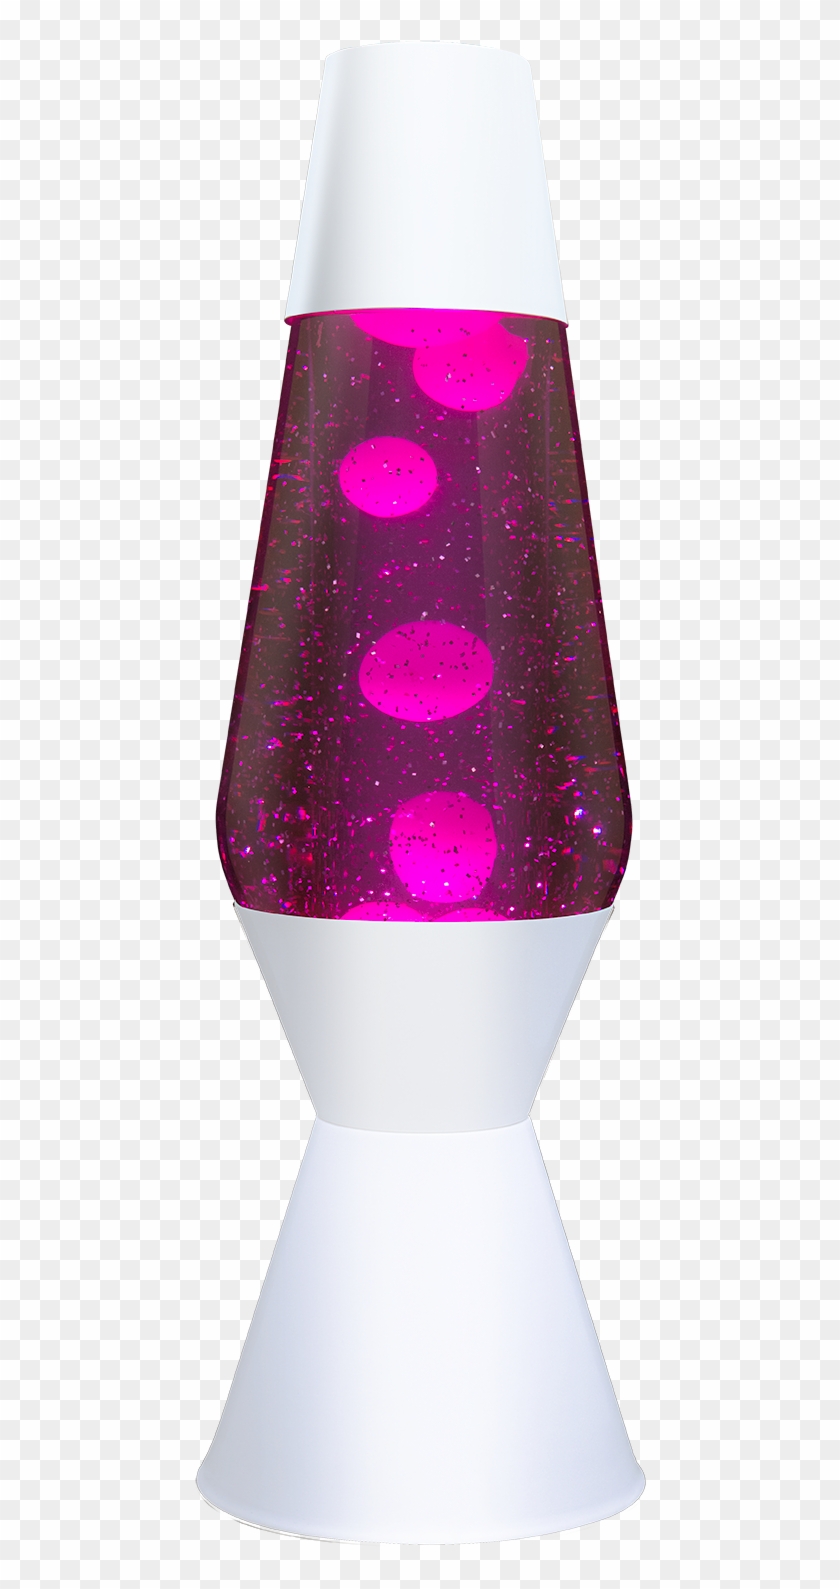 Purple & White With Glitter Lava Lamps, Double Play - Lip Gloss Clipart #4293920